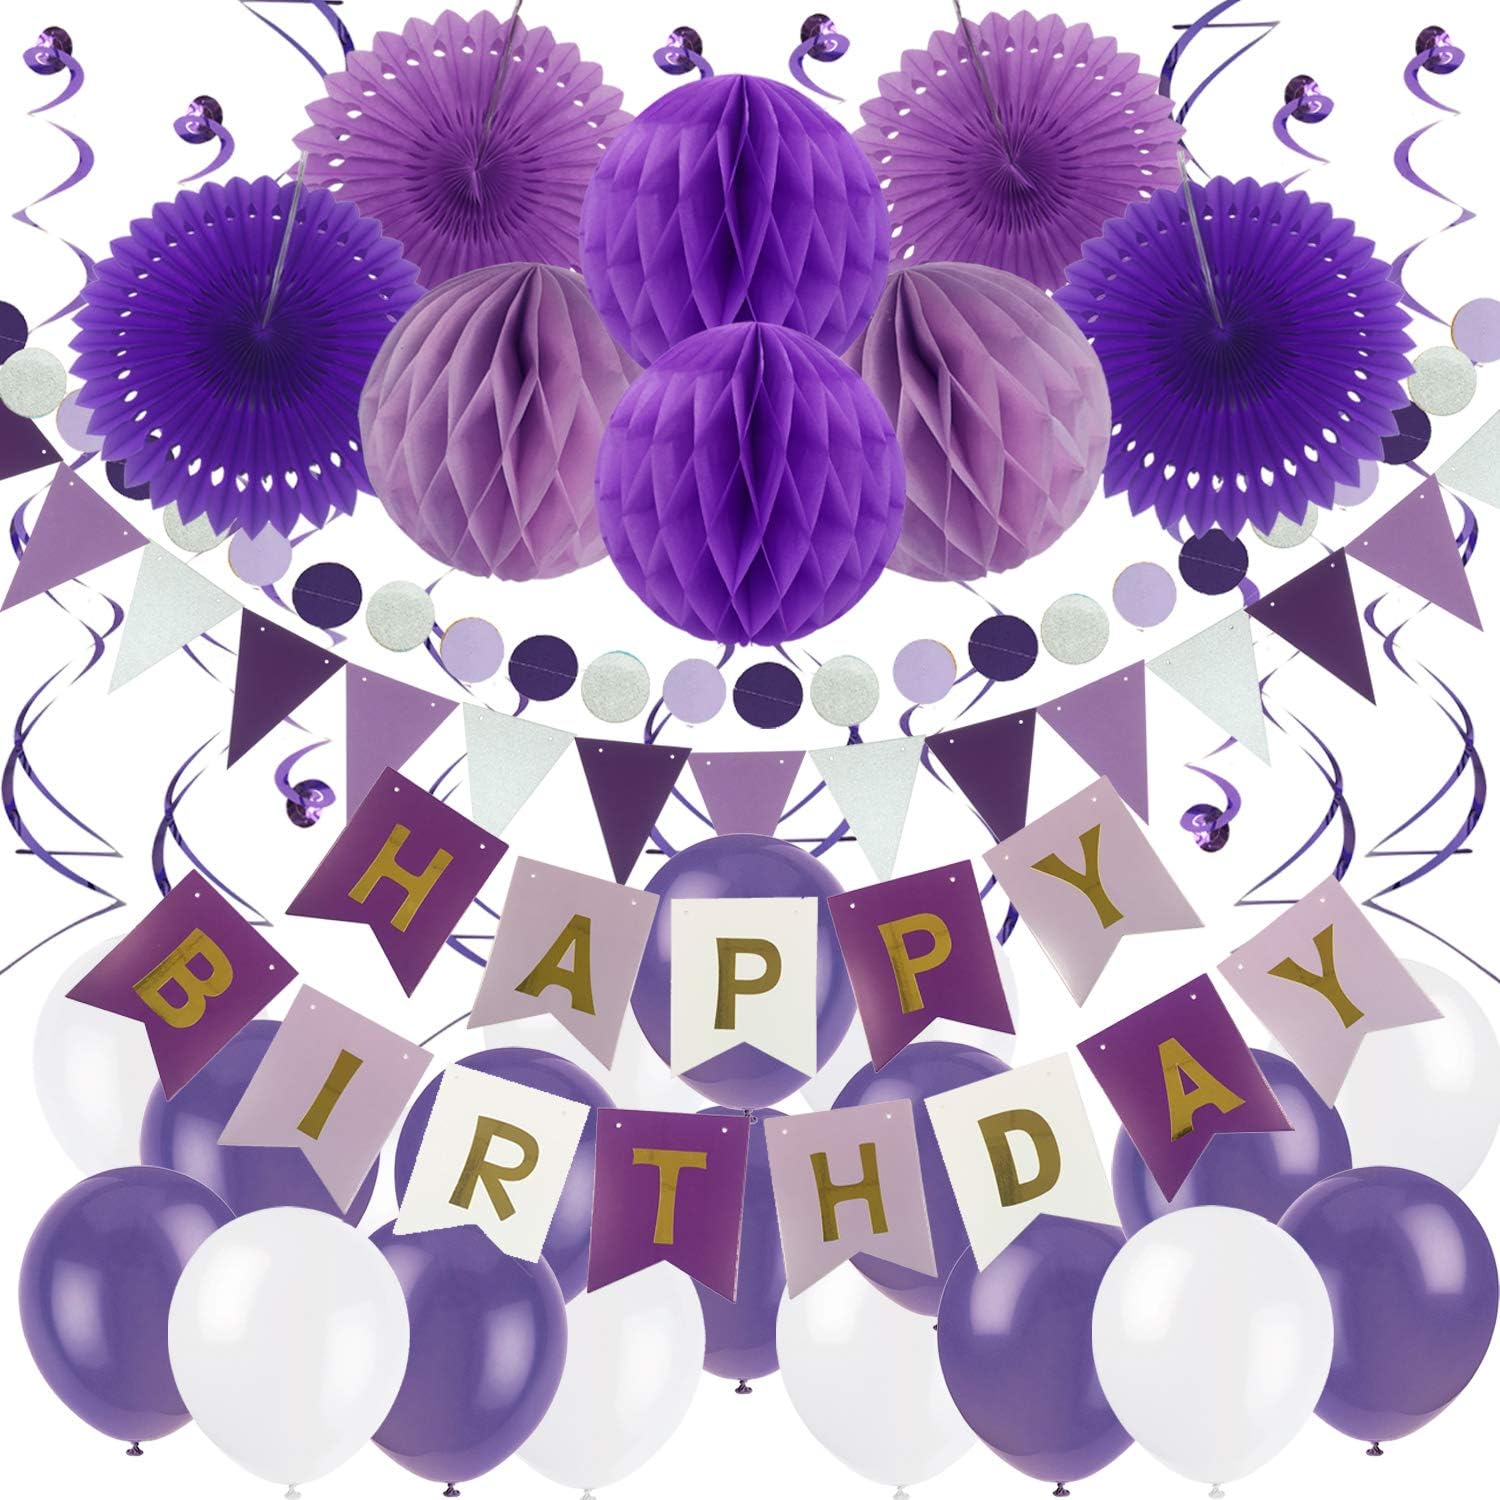 ZERODECO Birthday Party Decoration, Happy Birthday Banner with Paper Fans, Honeycomb Balls, Triangular Pennants, Circle Paper Garland, Hanging Swirls and Balloons - Purple, Lavender and White